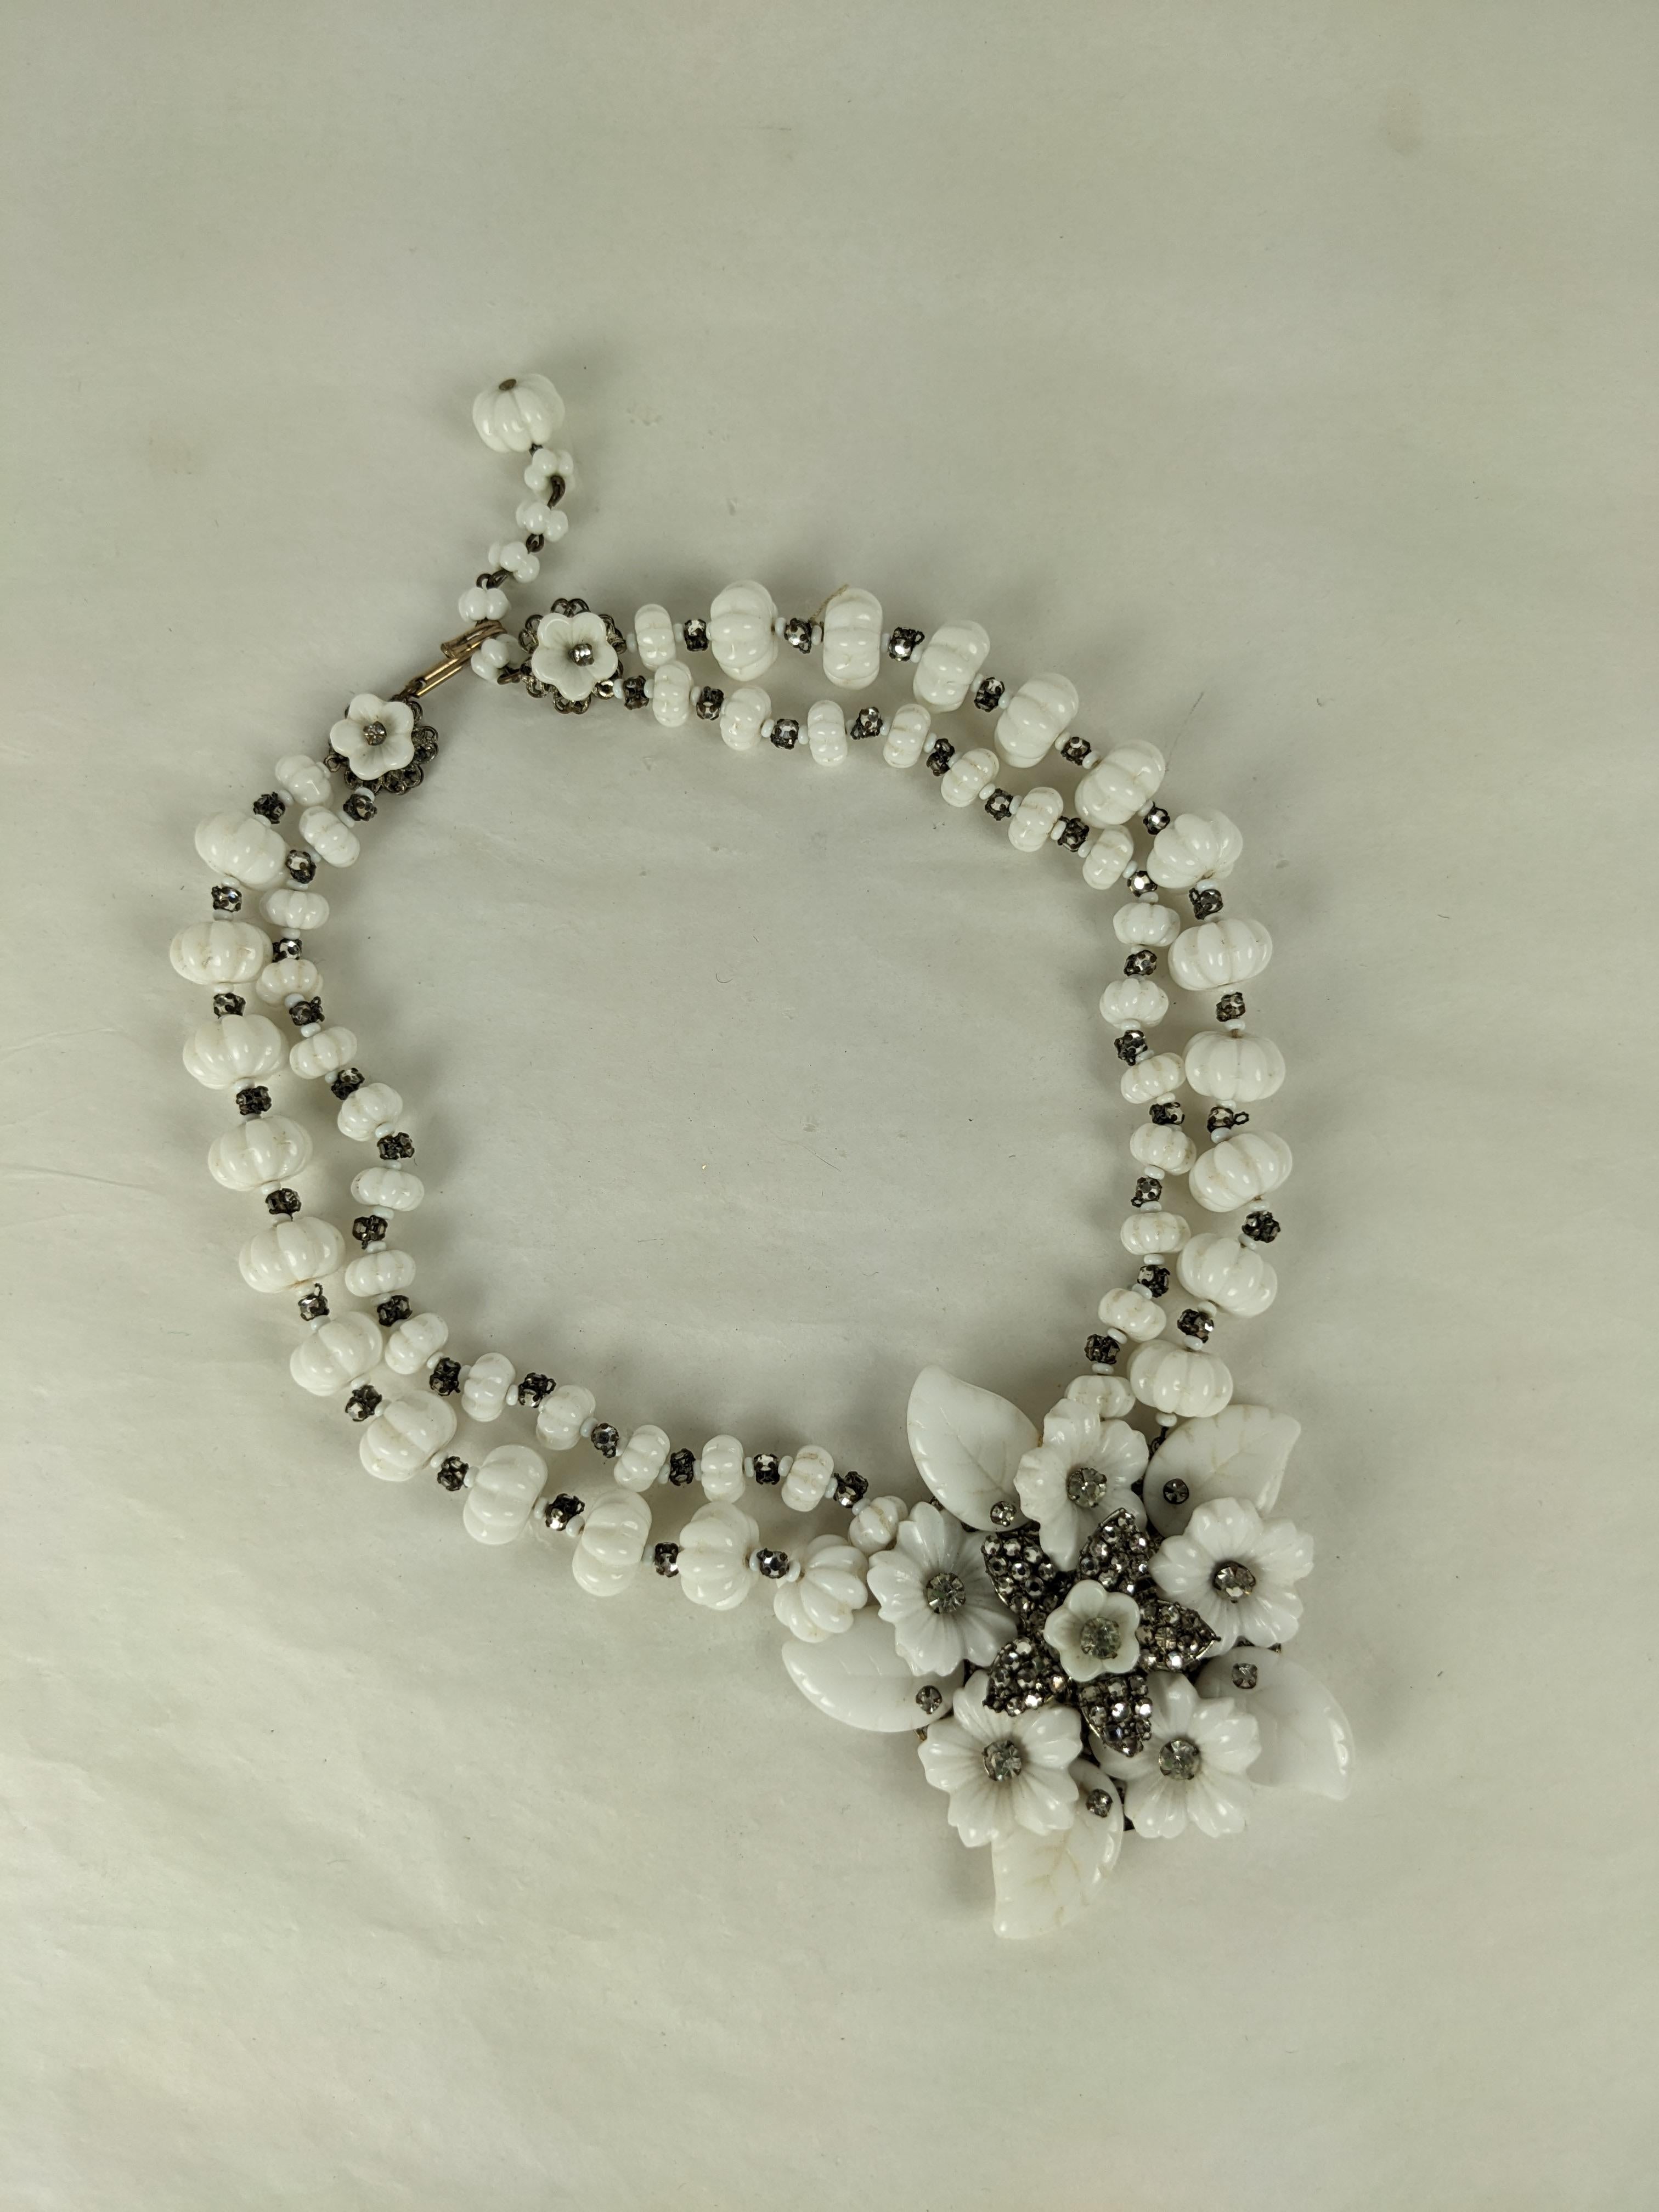 Stunning Miriam Haskell Milk Glass Flower Pendant Necklace from the 1940's. Fluted milk glass beads with hand sewn pave spacers hold a large pendant of poured glass leaves and hand sewn crystals. Signed. 1940's USA. Fits 14-16